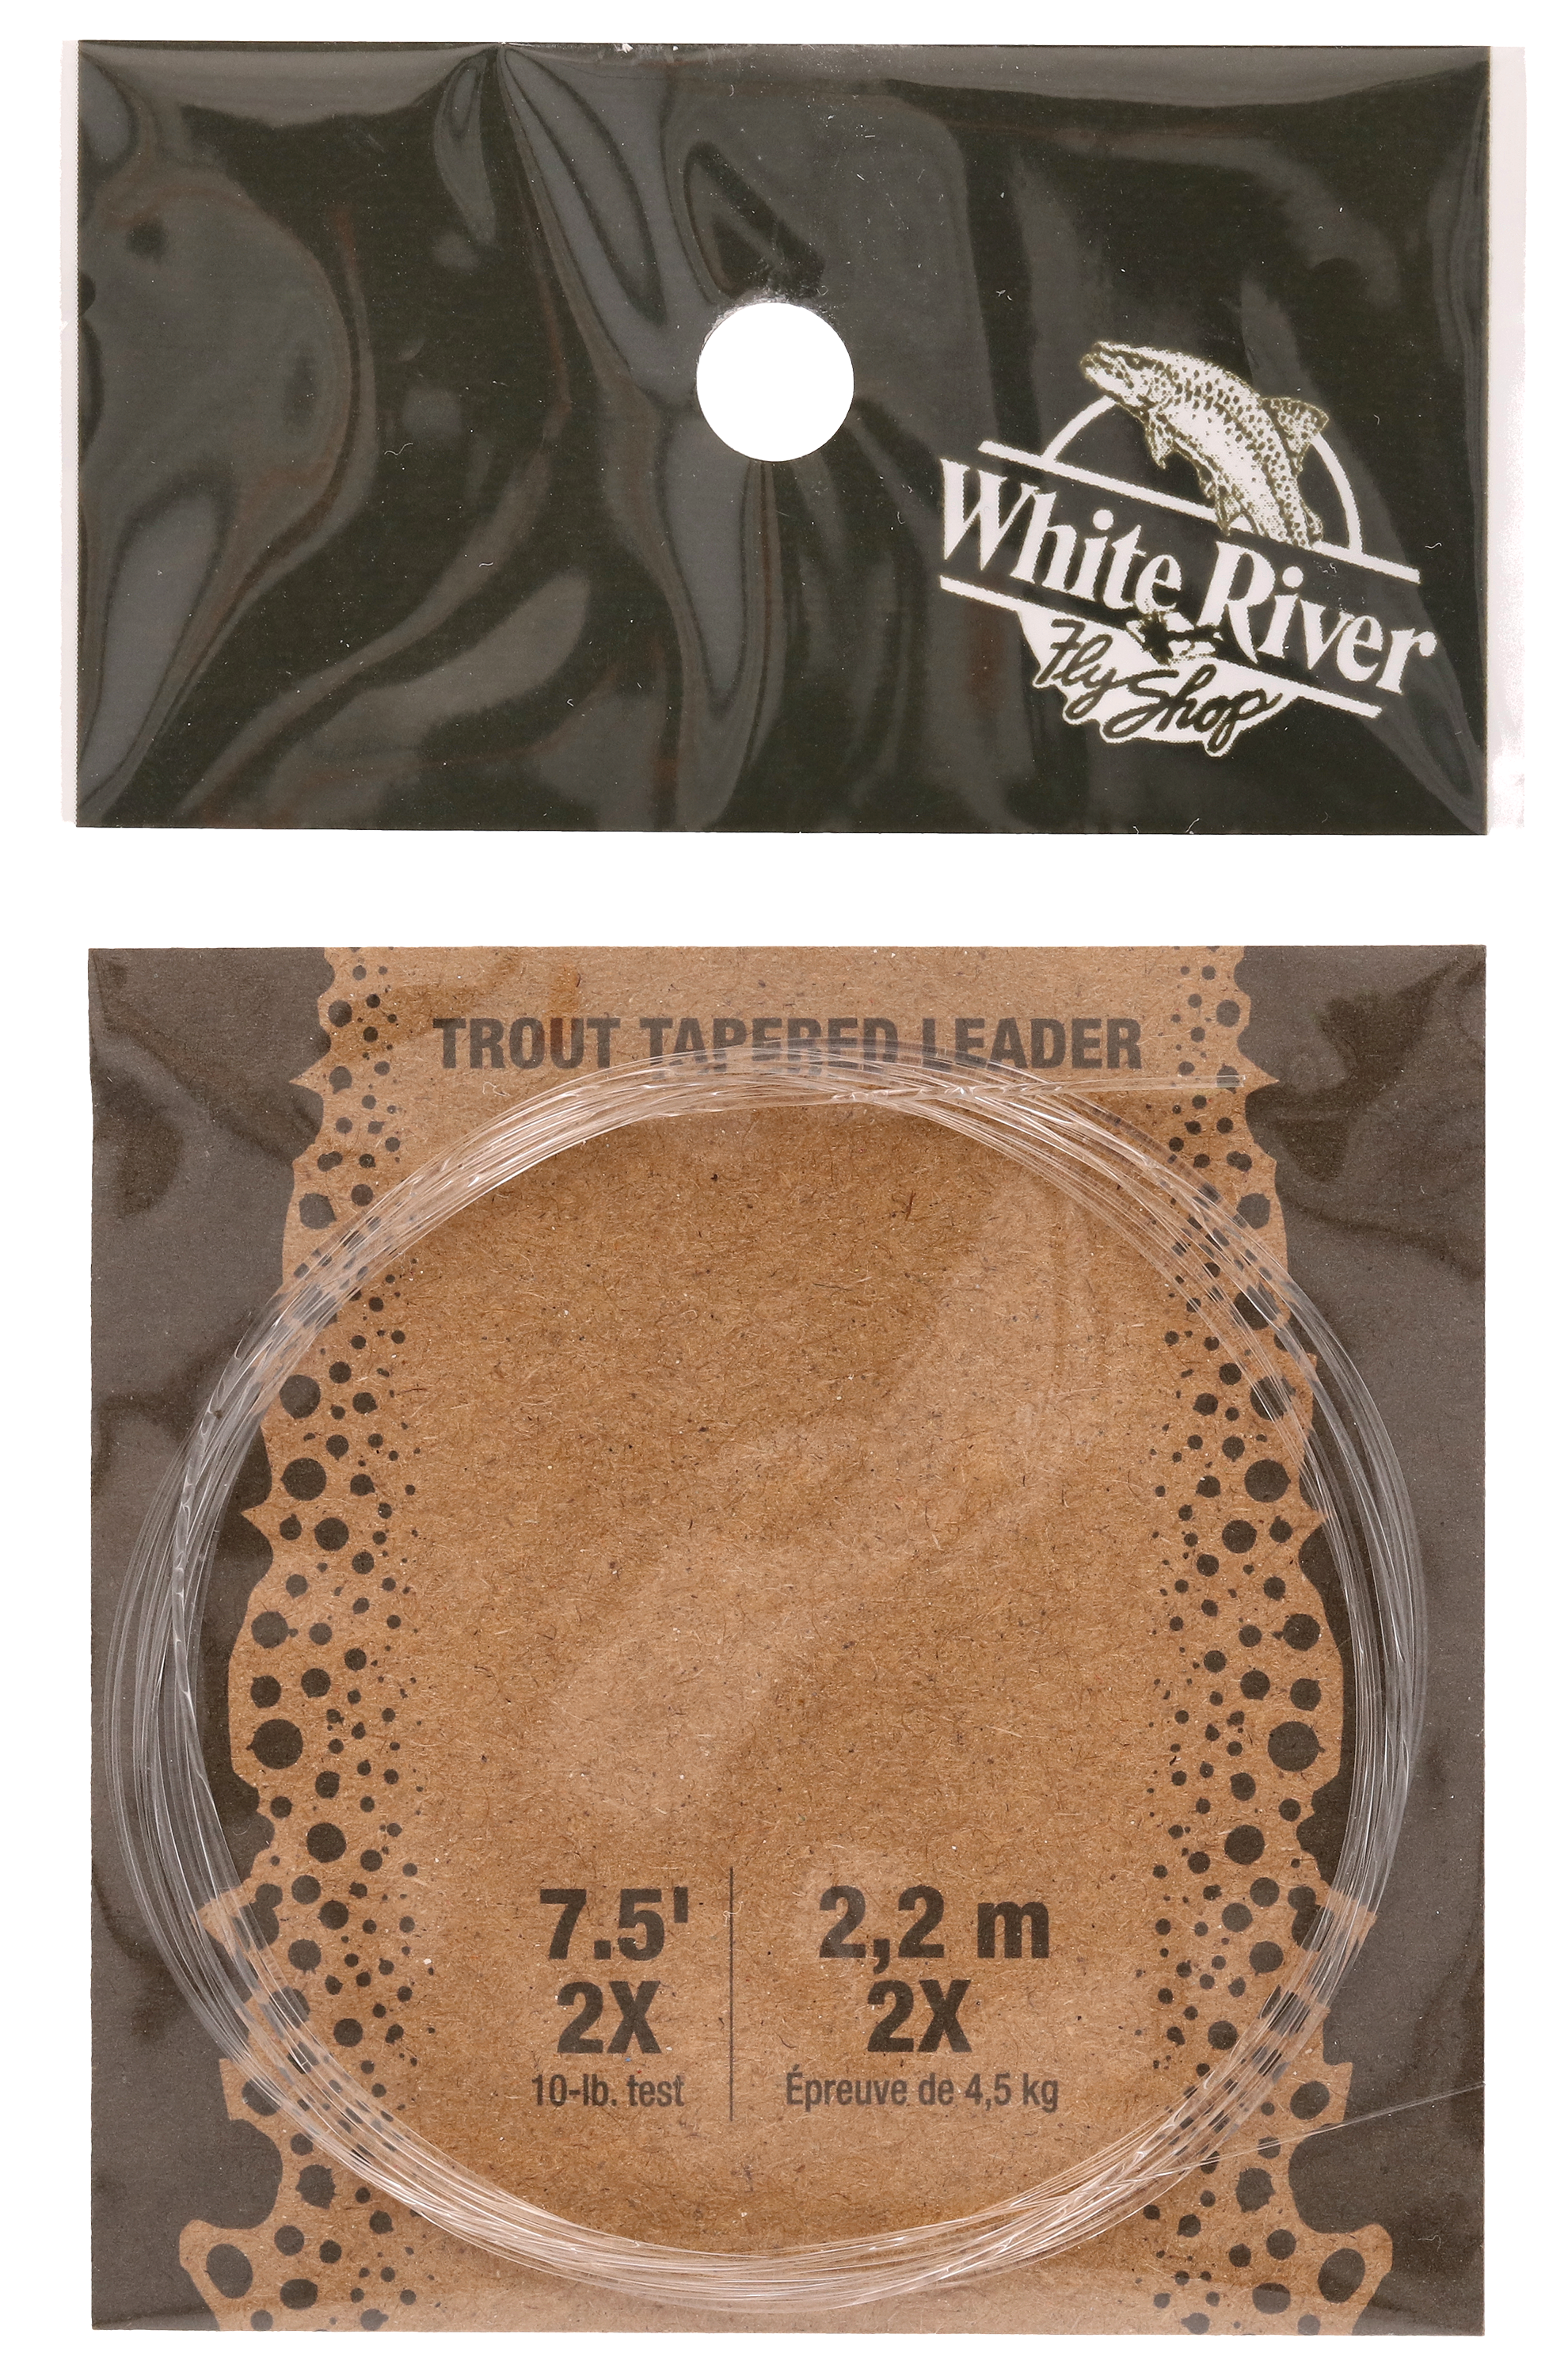 Cabela’s Trout Leader - Cabelas - White RIVER - Leaders, Tippets 